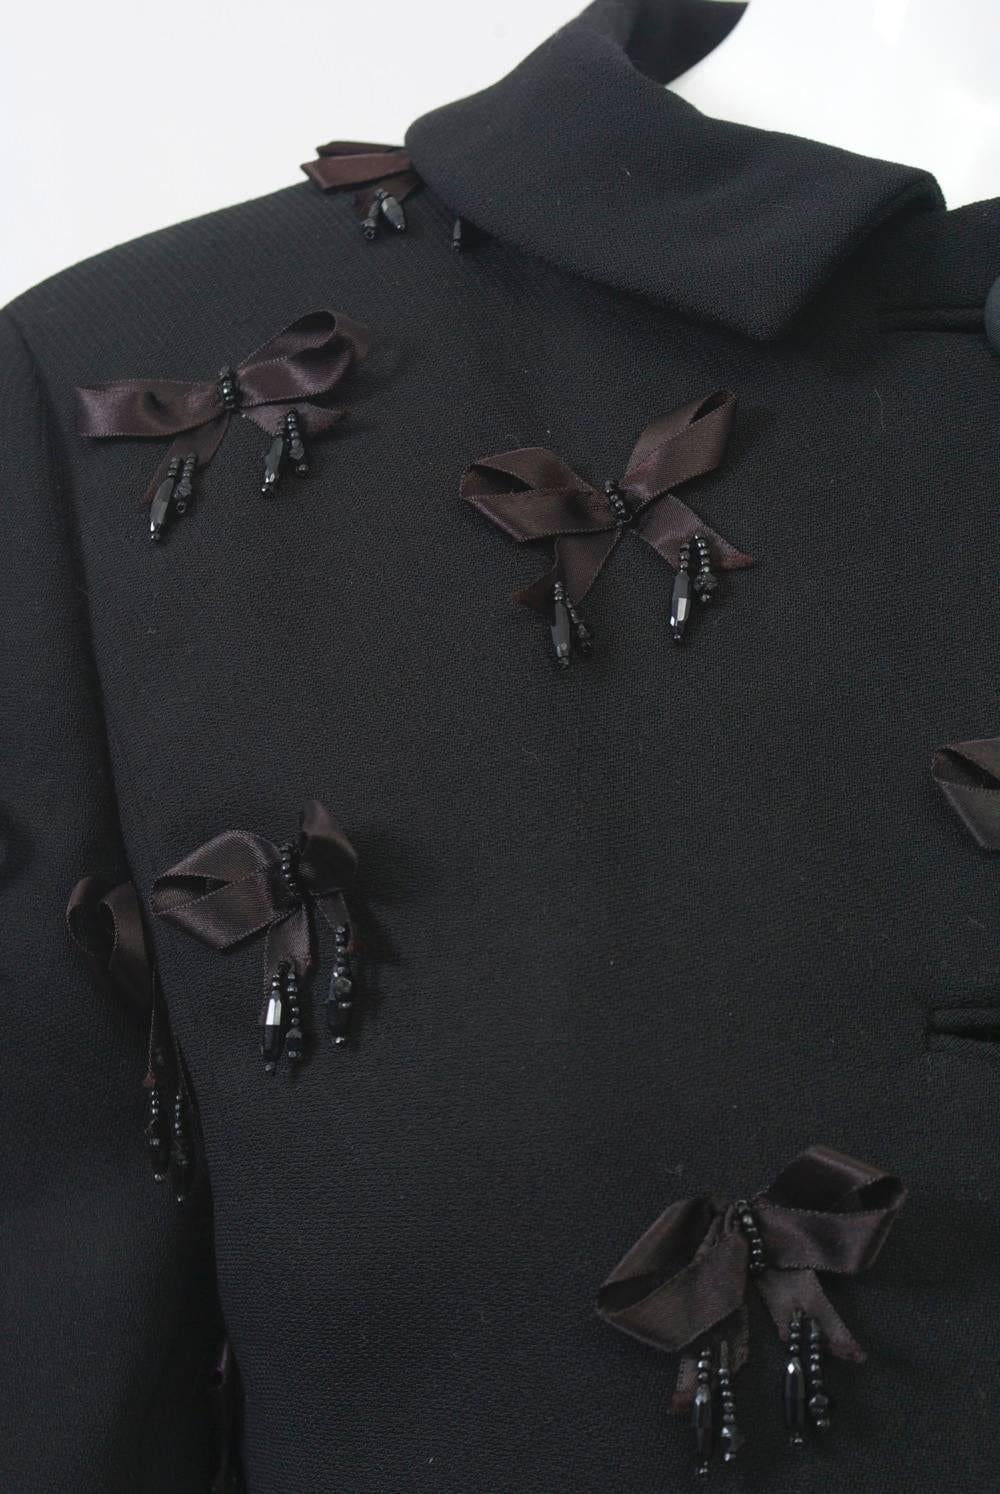 Bill Blass 1960s Jacket with Bows 1